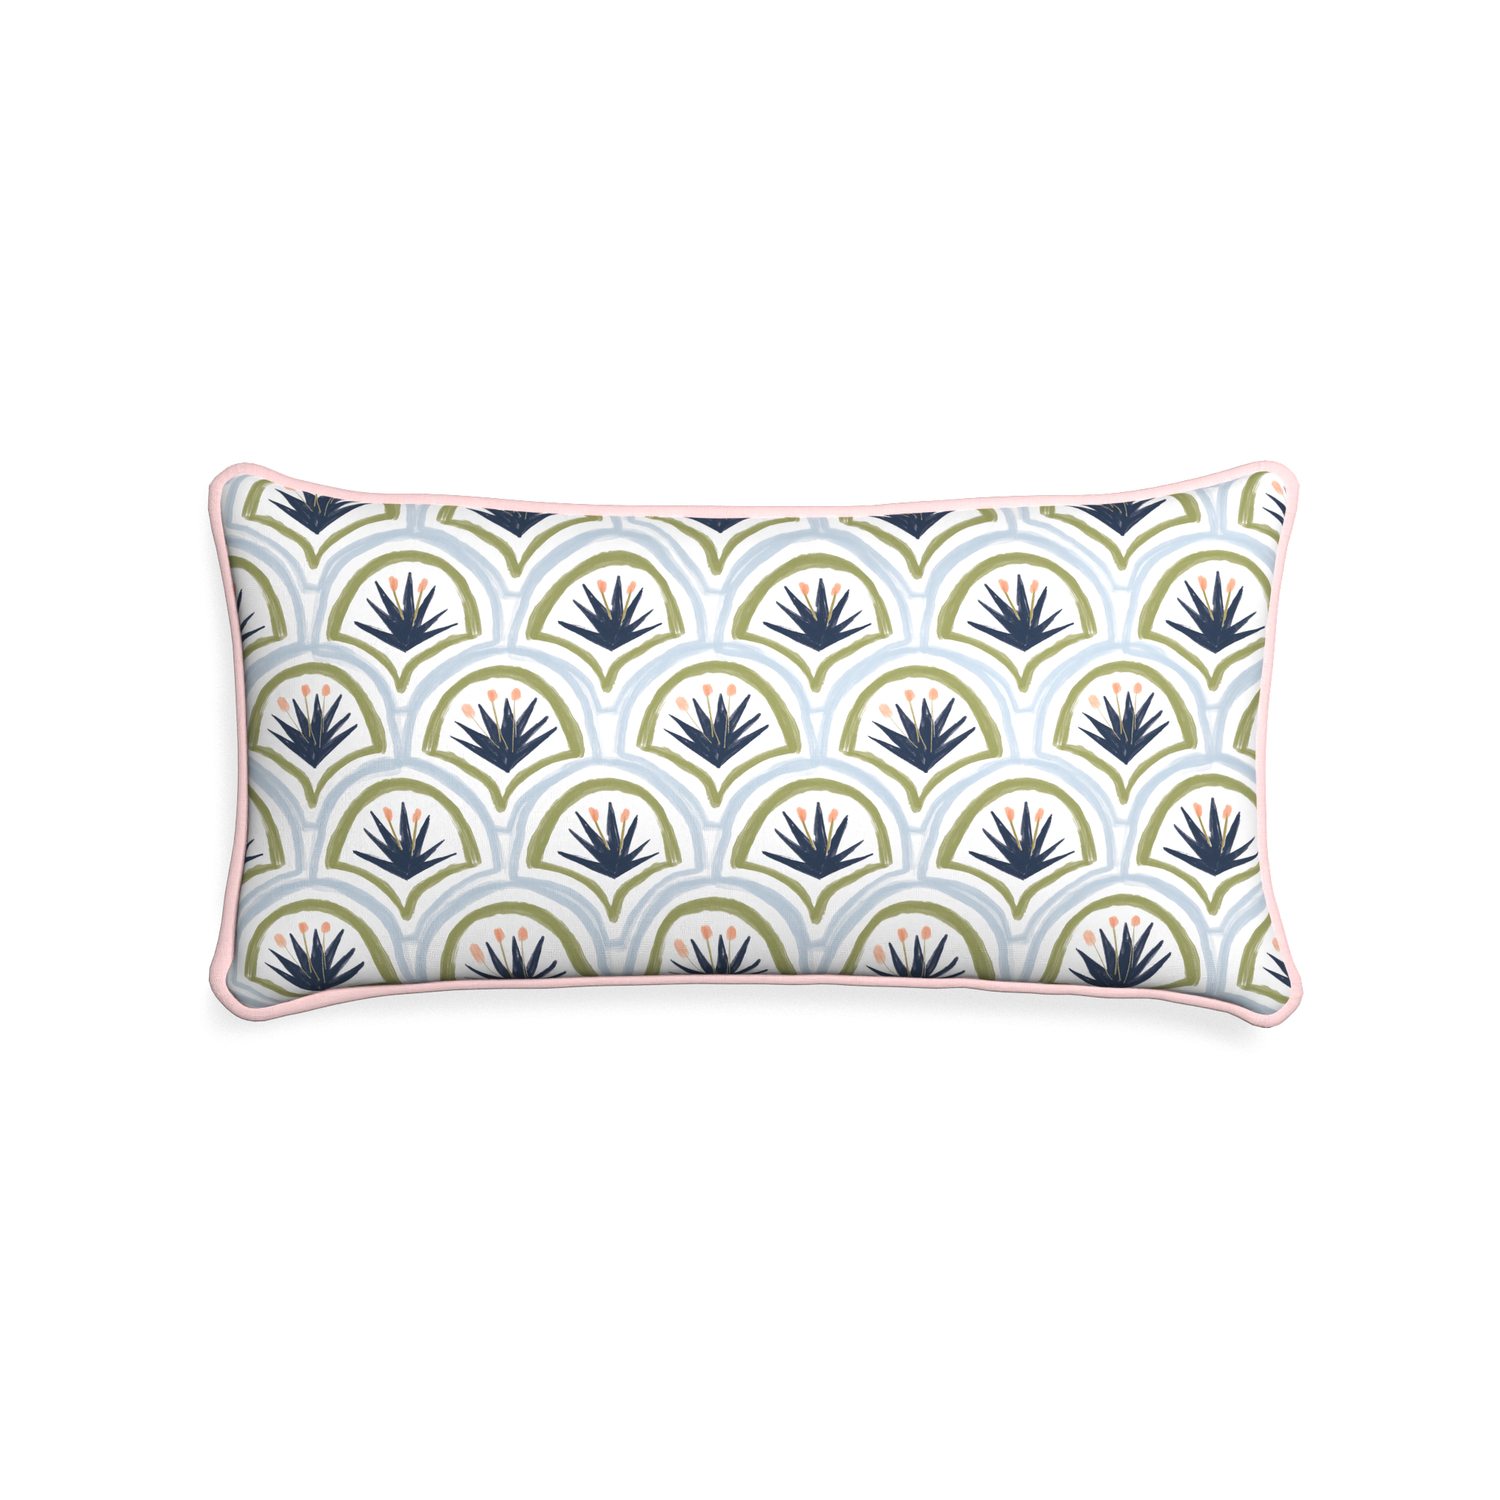 Midi-lumbar thatcher midnight custom art deco palm patternpillow with petal piping on white background